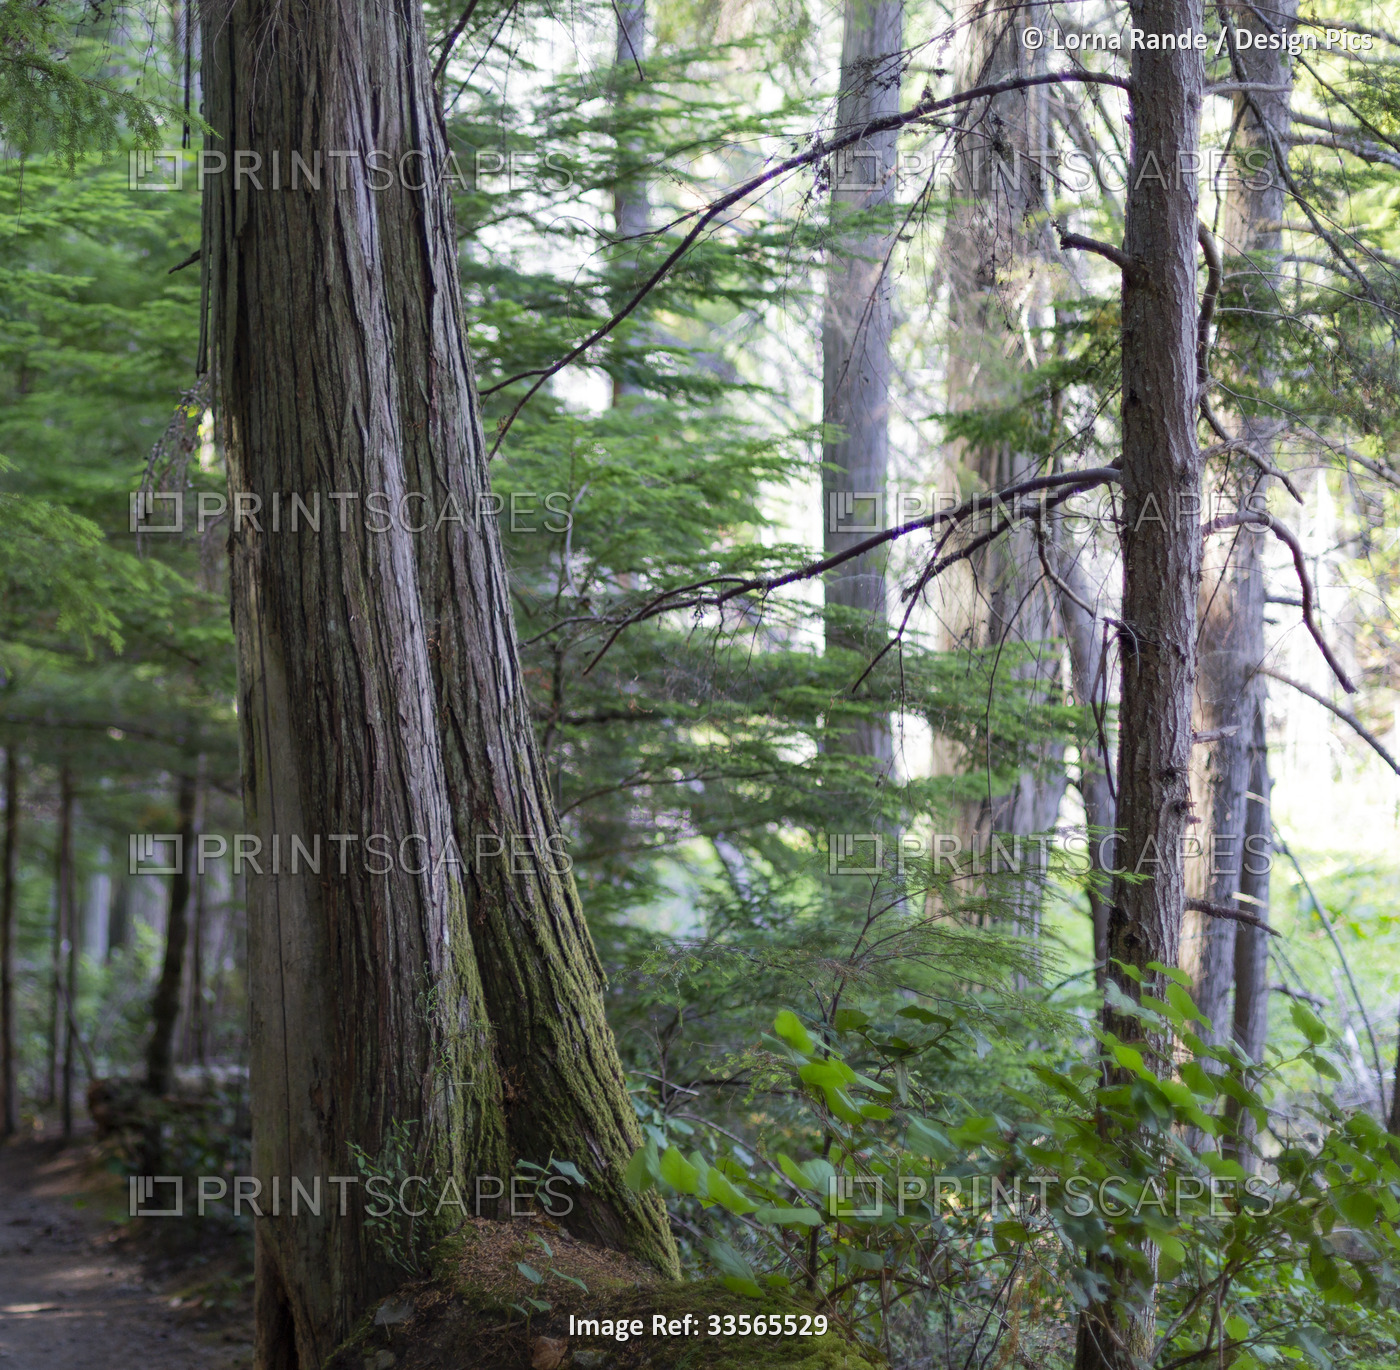 Natural beauty of trees and lush foliage along a hiking trail in Smuggler Cove ...